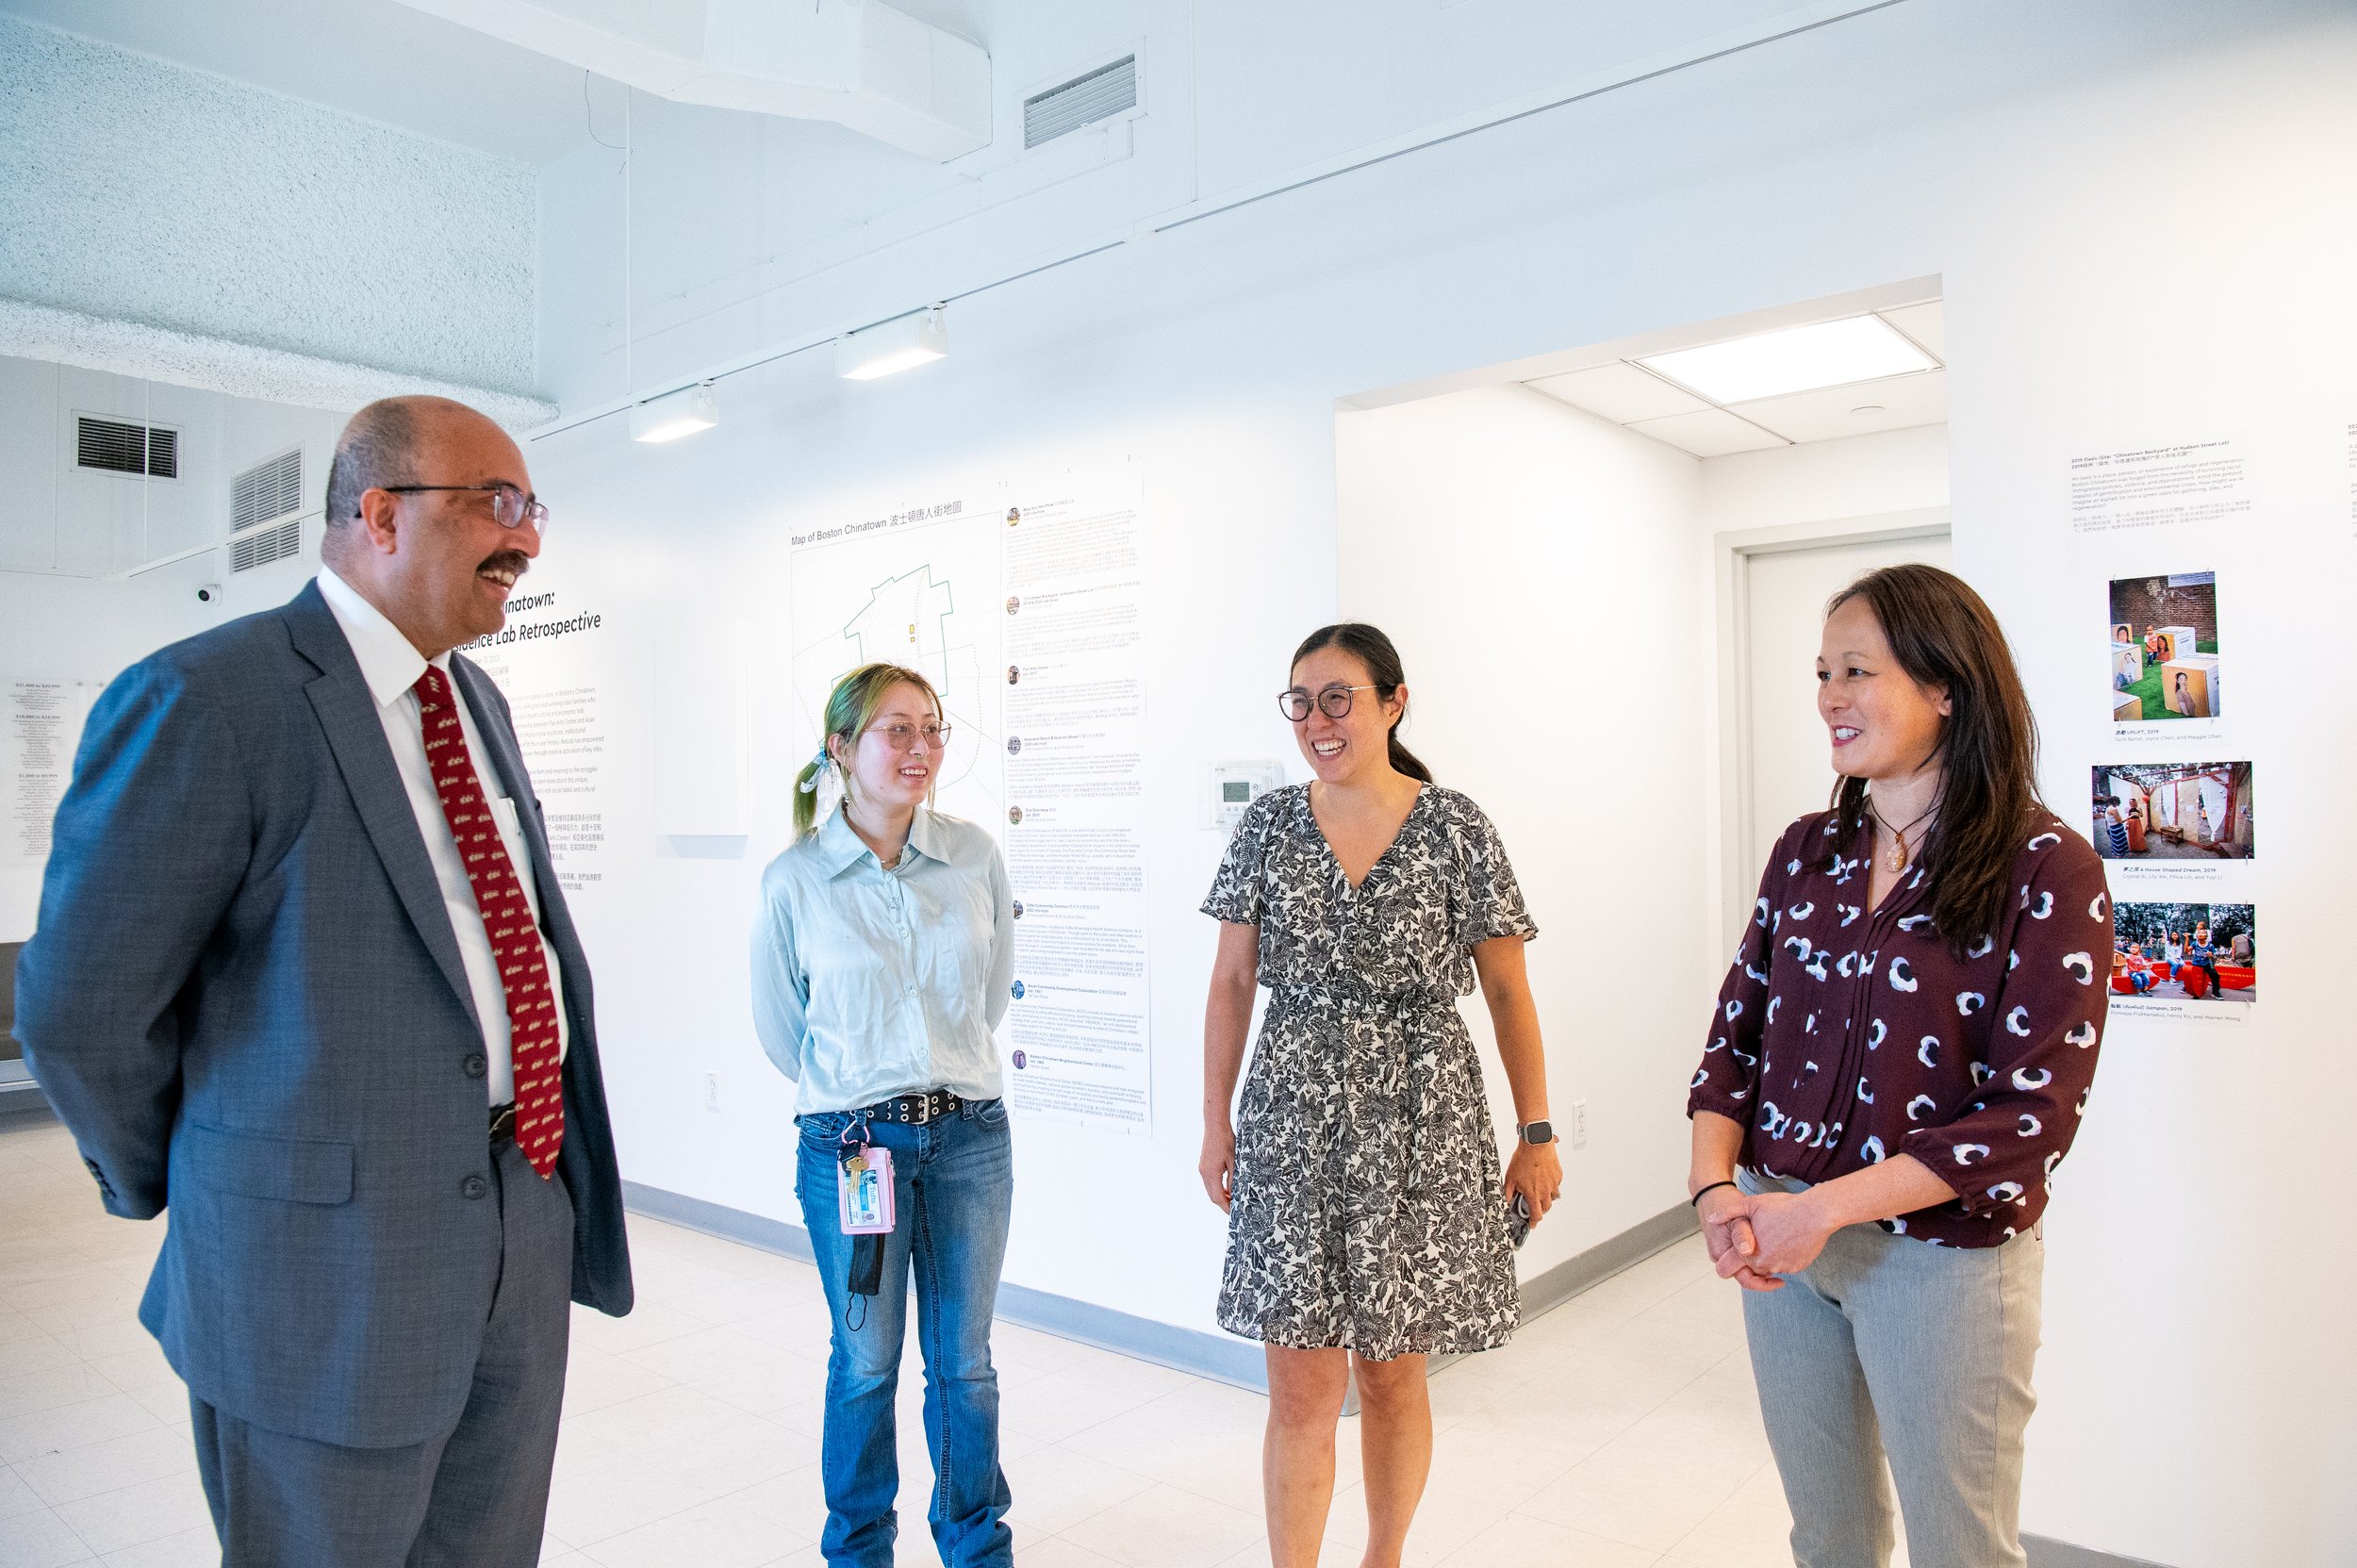 President Kumar with Rita Dai, Tufts student, Cynthia Woo, Director of Pao Arts Center, and Joann Yung, Chief Development Officer, at Pao Arts Center